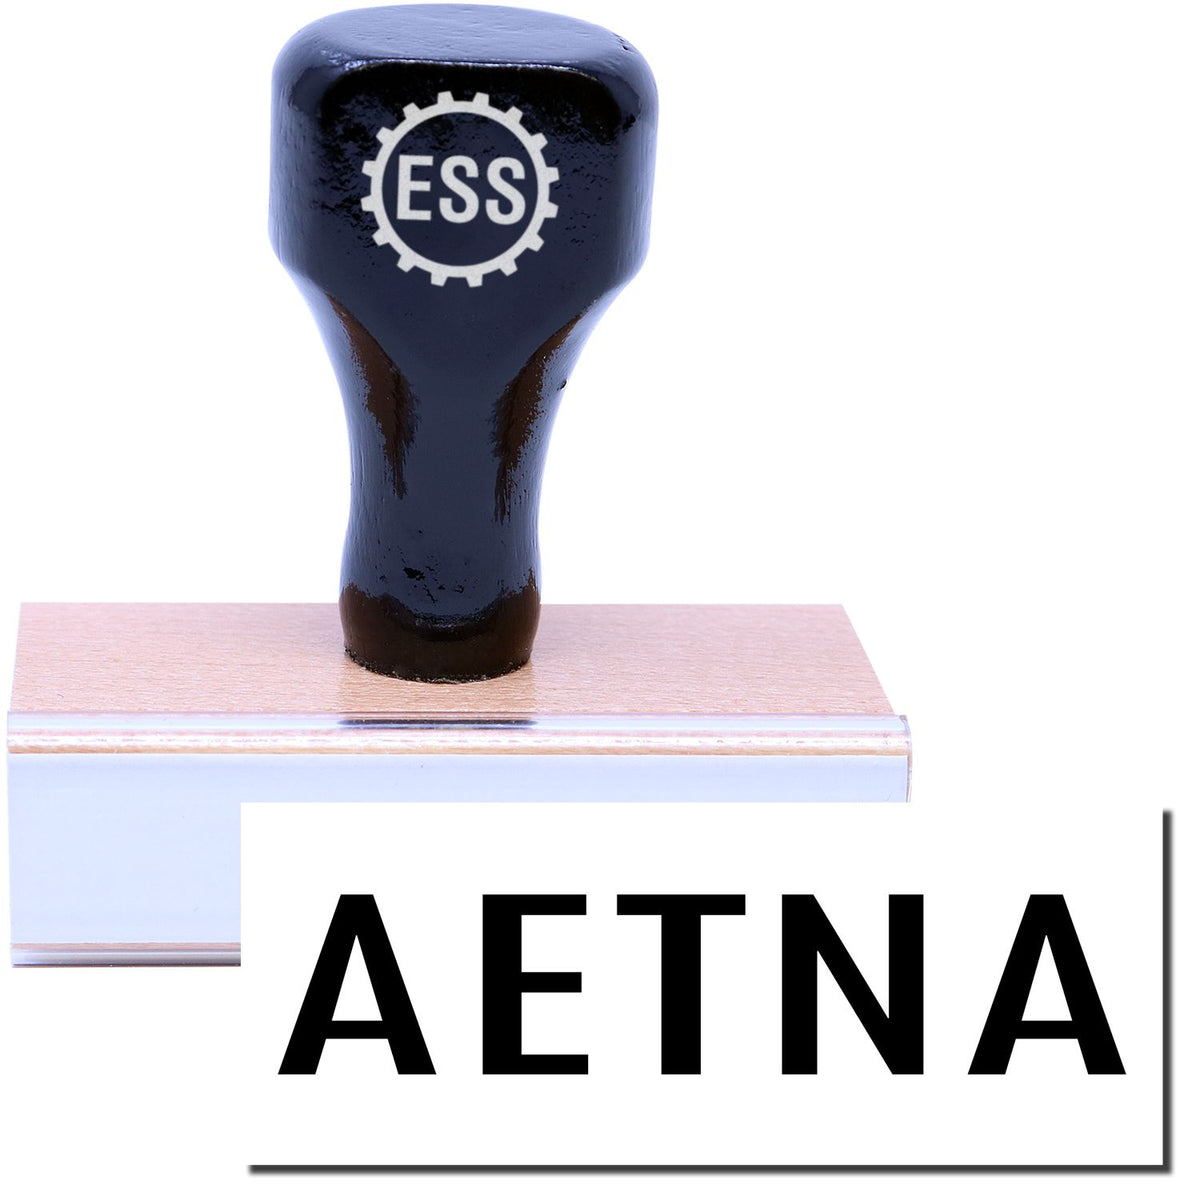 A stock office medical rubber stamp with a stamped image showing how the text &quot;AETNA&quot; is displayed after stamping.